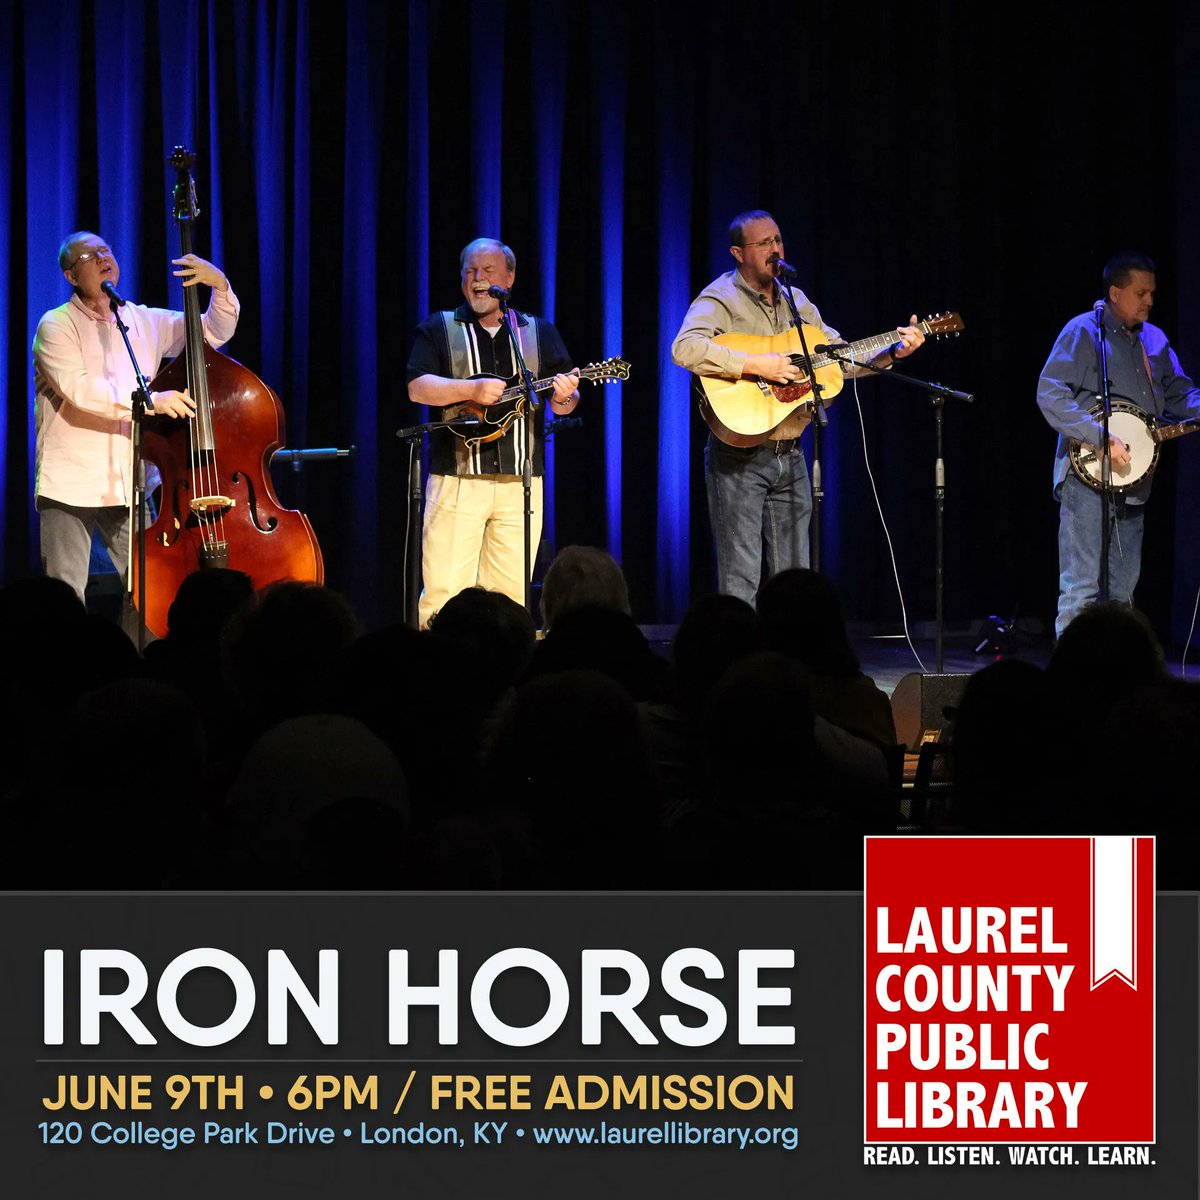 Join us as welcome Iron Horse back to the library stage! FREE admission, doors open at 5:30pm. 🔥 Link in bio.
...
@ironhorsebluegrass  #LaurelLibrary #VisitLondonKY #PublicLibraries #Music #Bluegrass #IronHorse